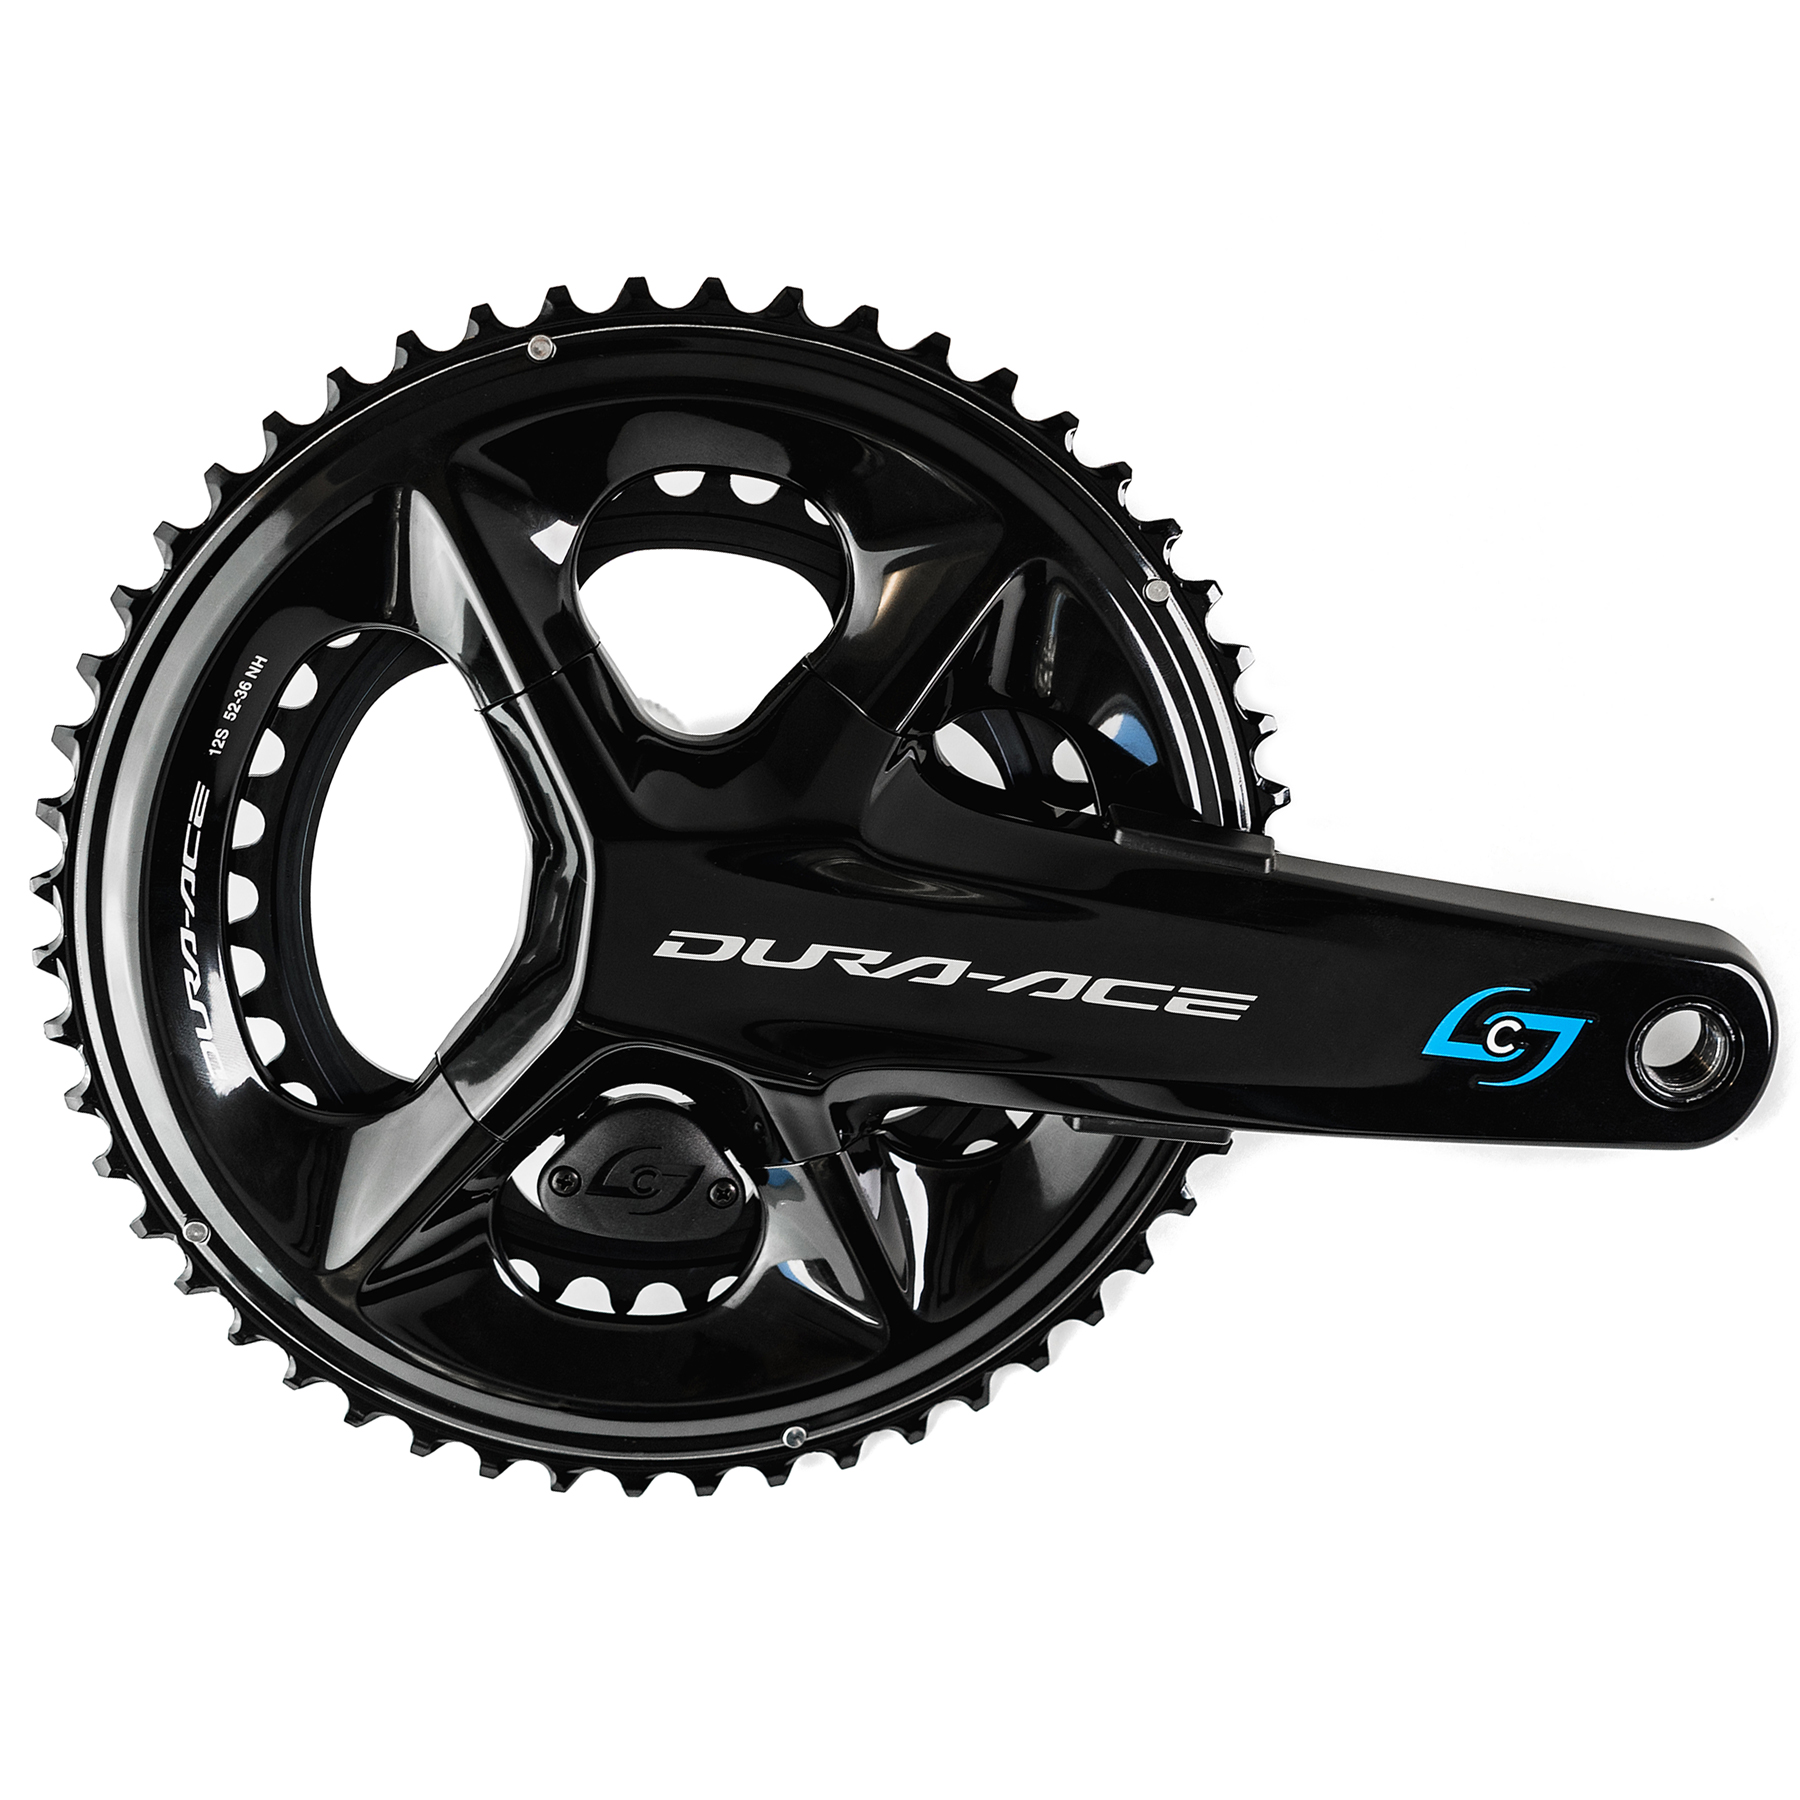 Productfoto van Stages Cycling Power R Powermeter | Crank by Shimano - Dura Ace R9200 | 2x12-speed